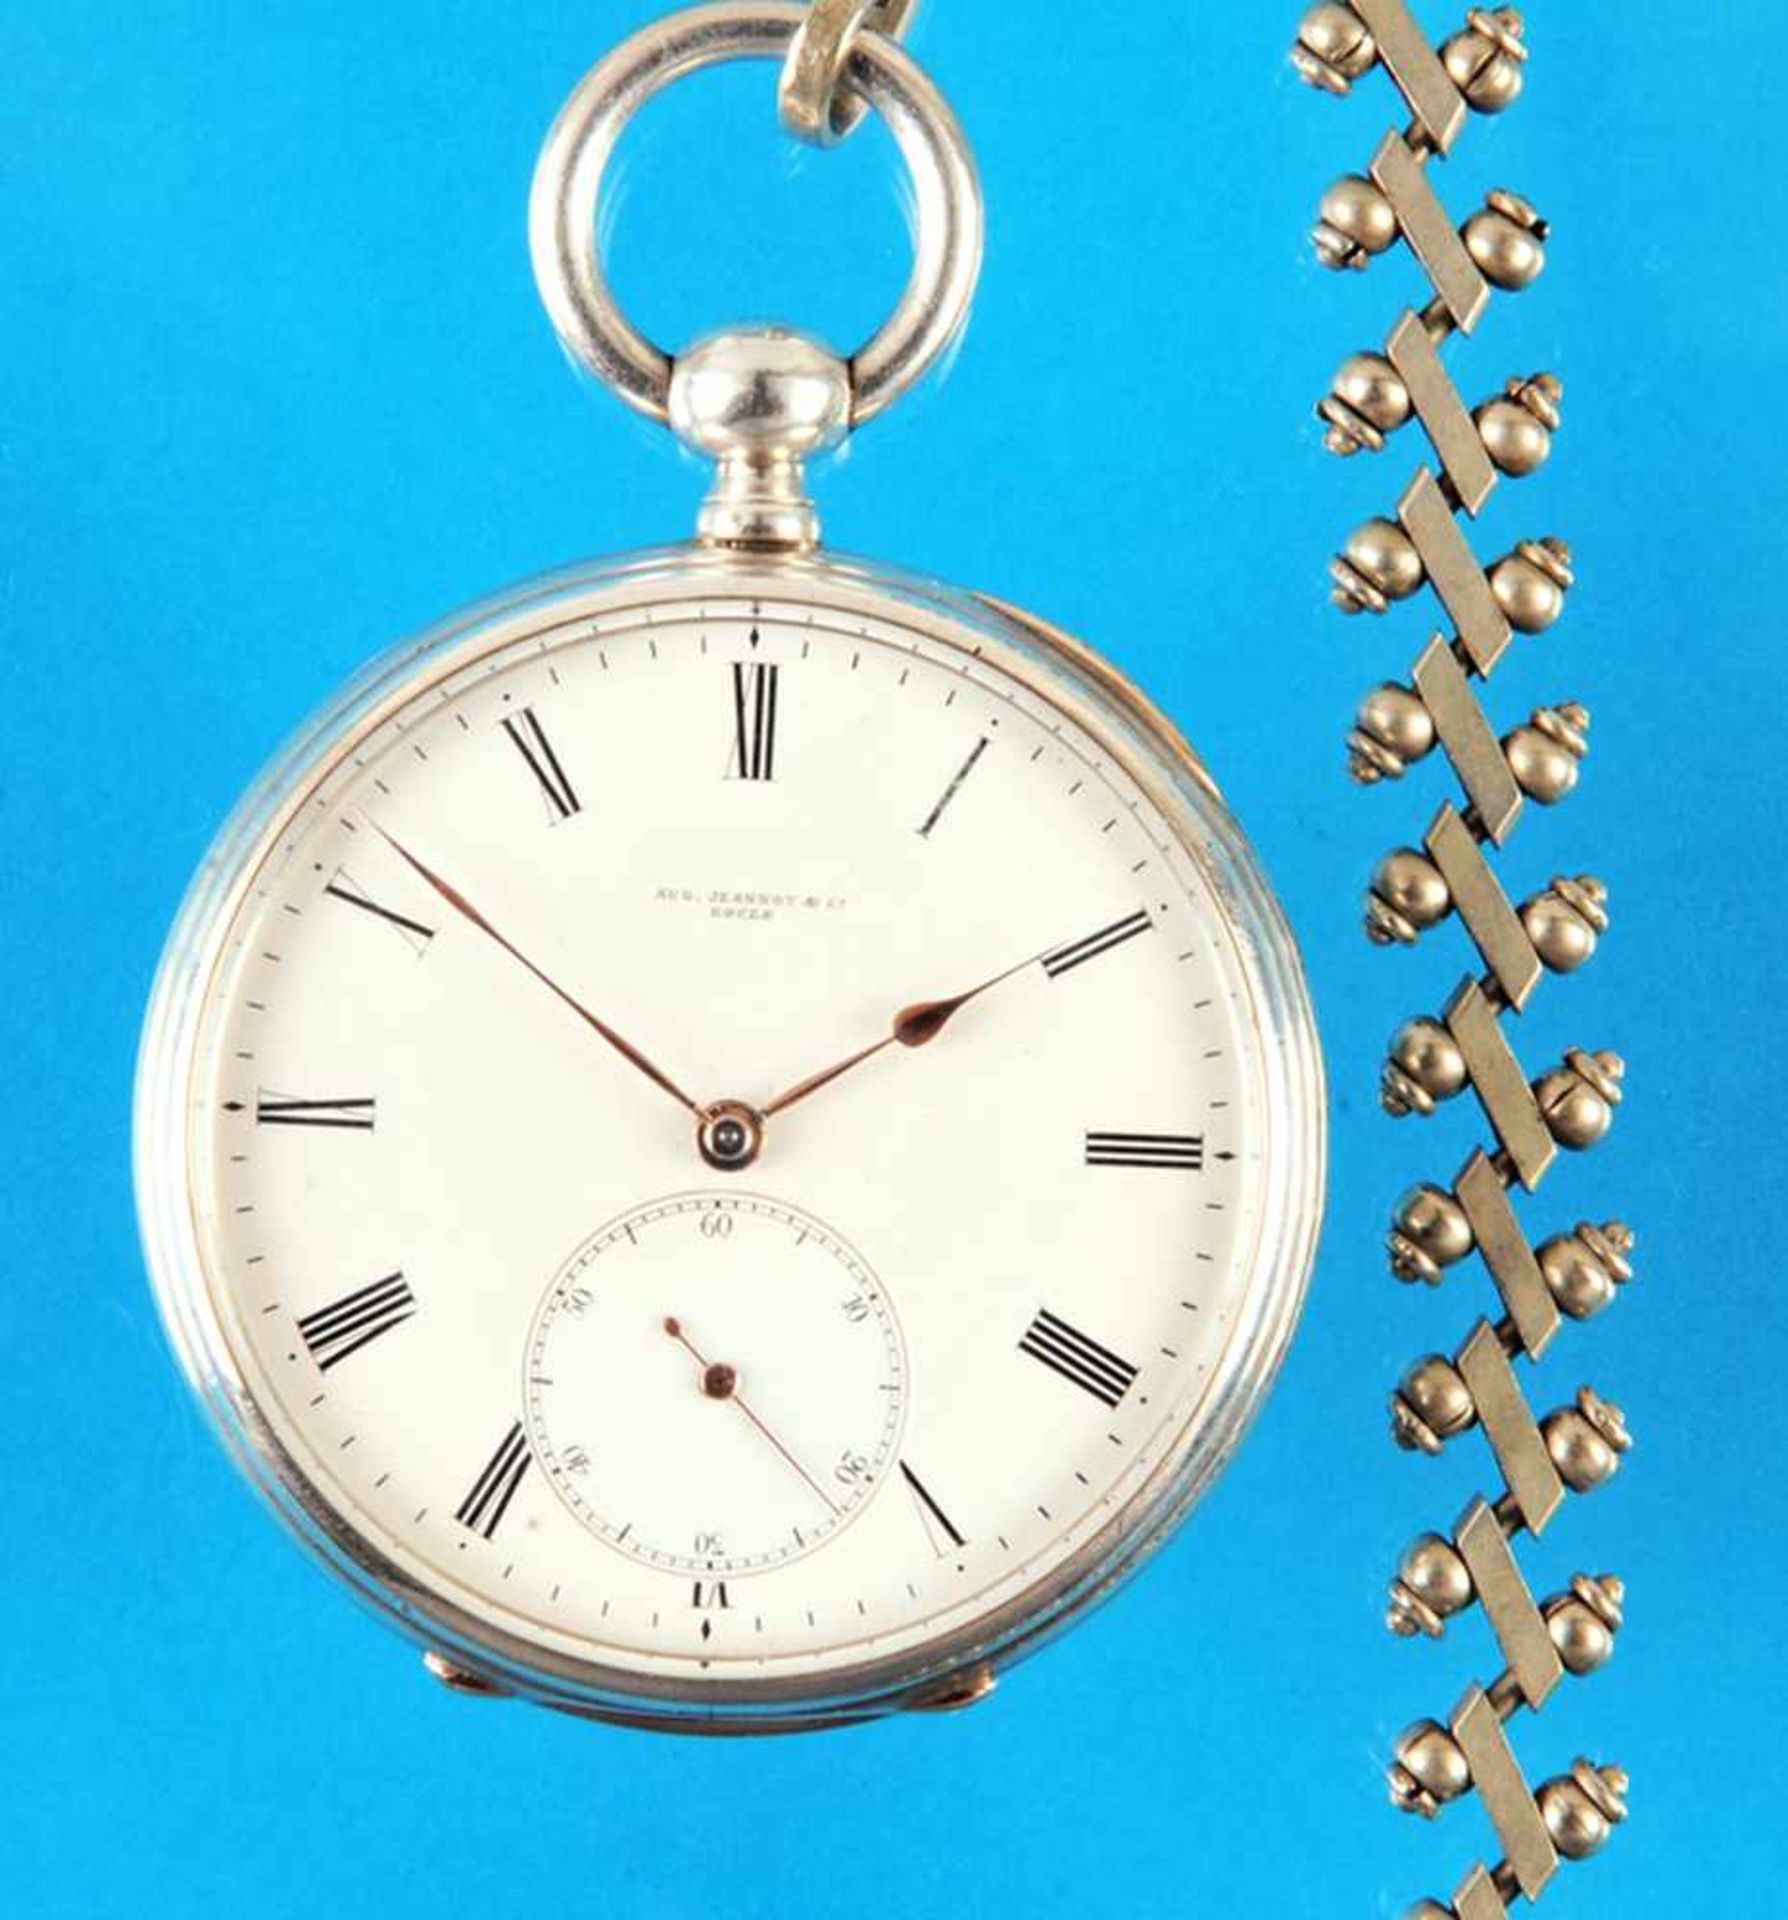 Silver pocket watch with chronometer escapement and pocket watch key, August Jeanot & Co.